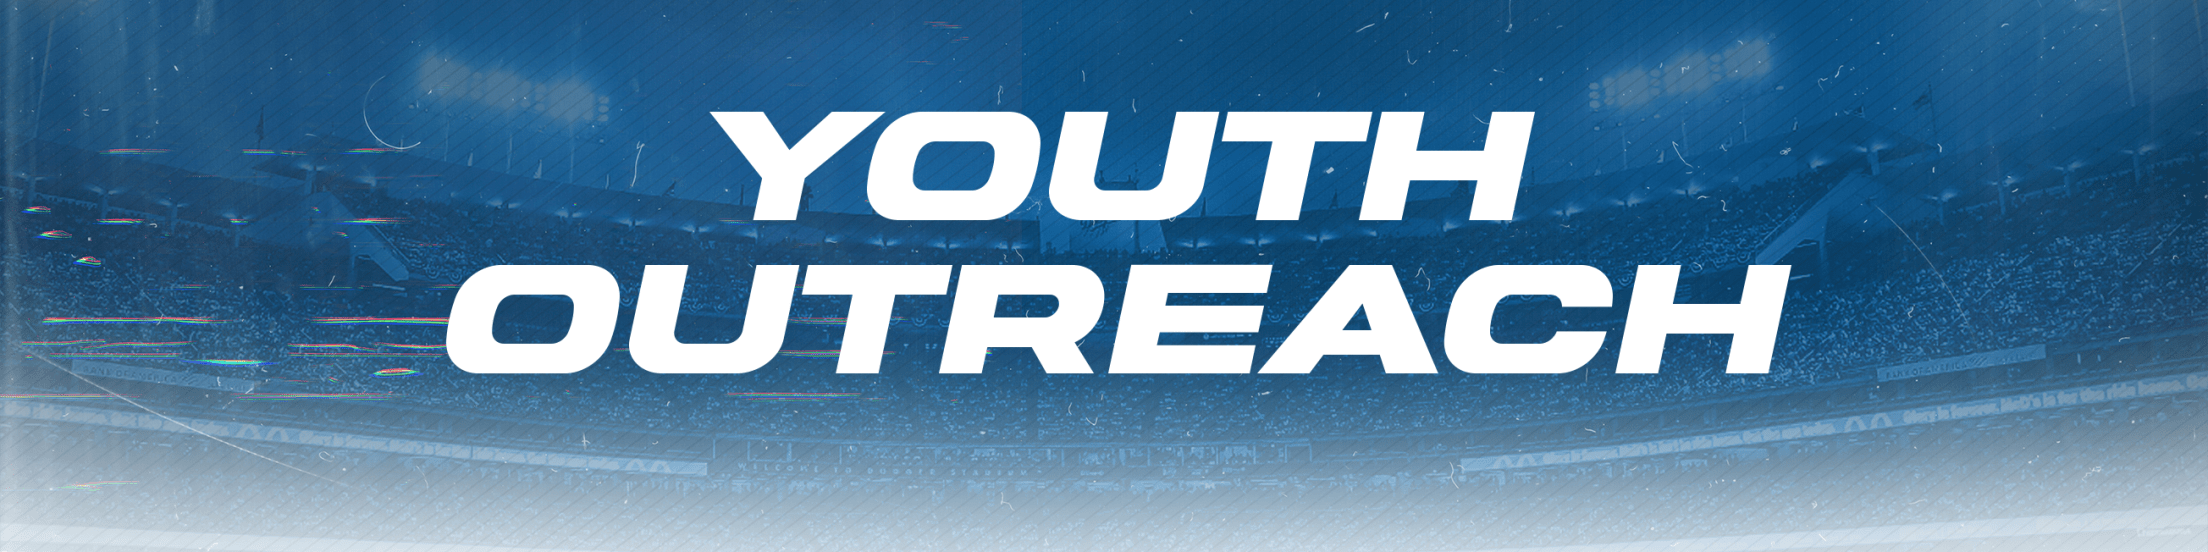 MLB outreach programs for underserved youth